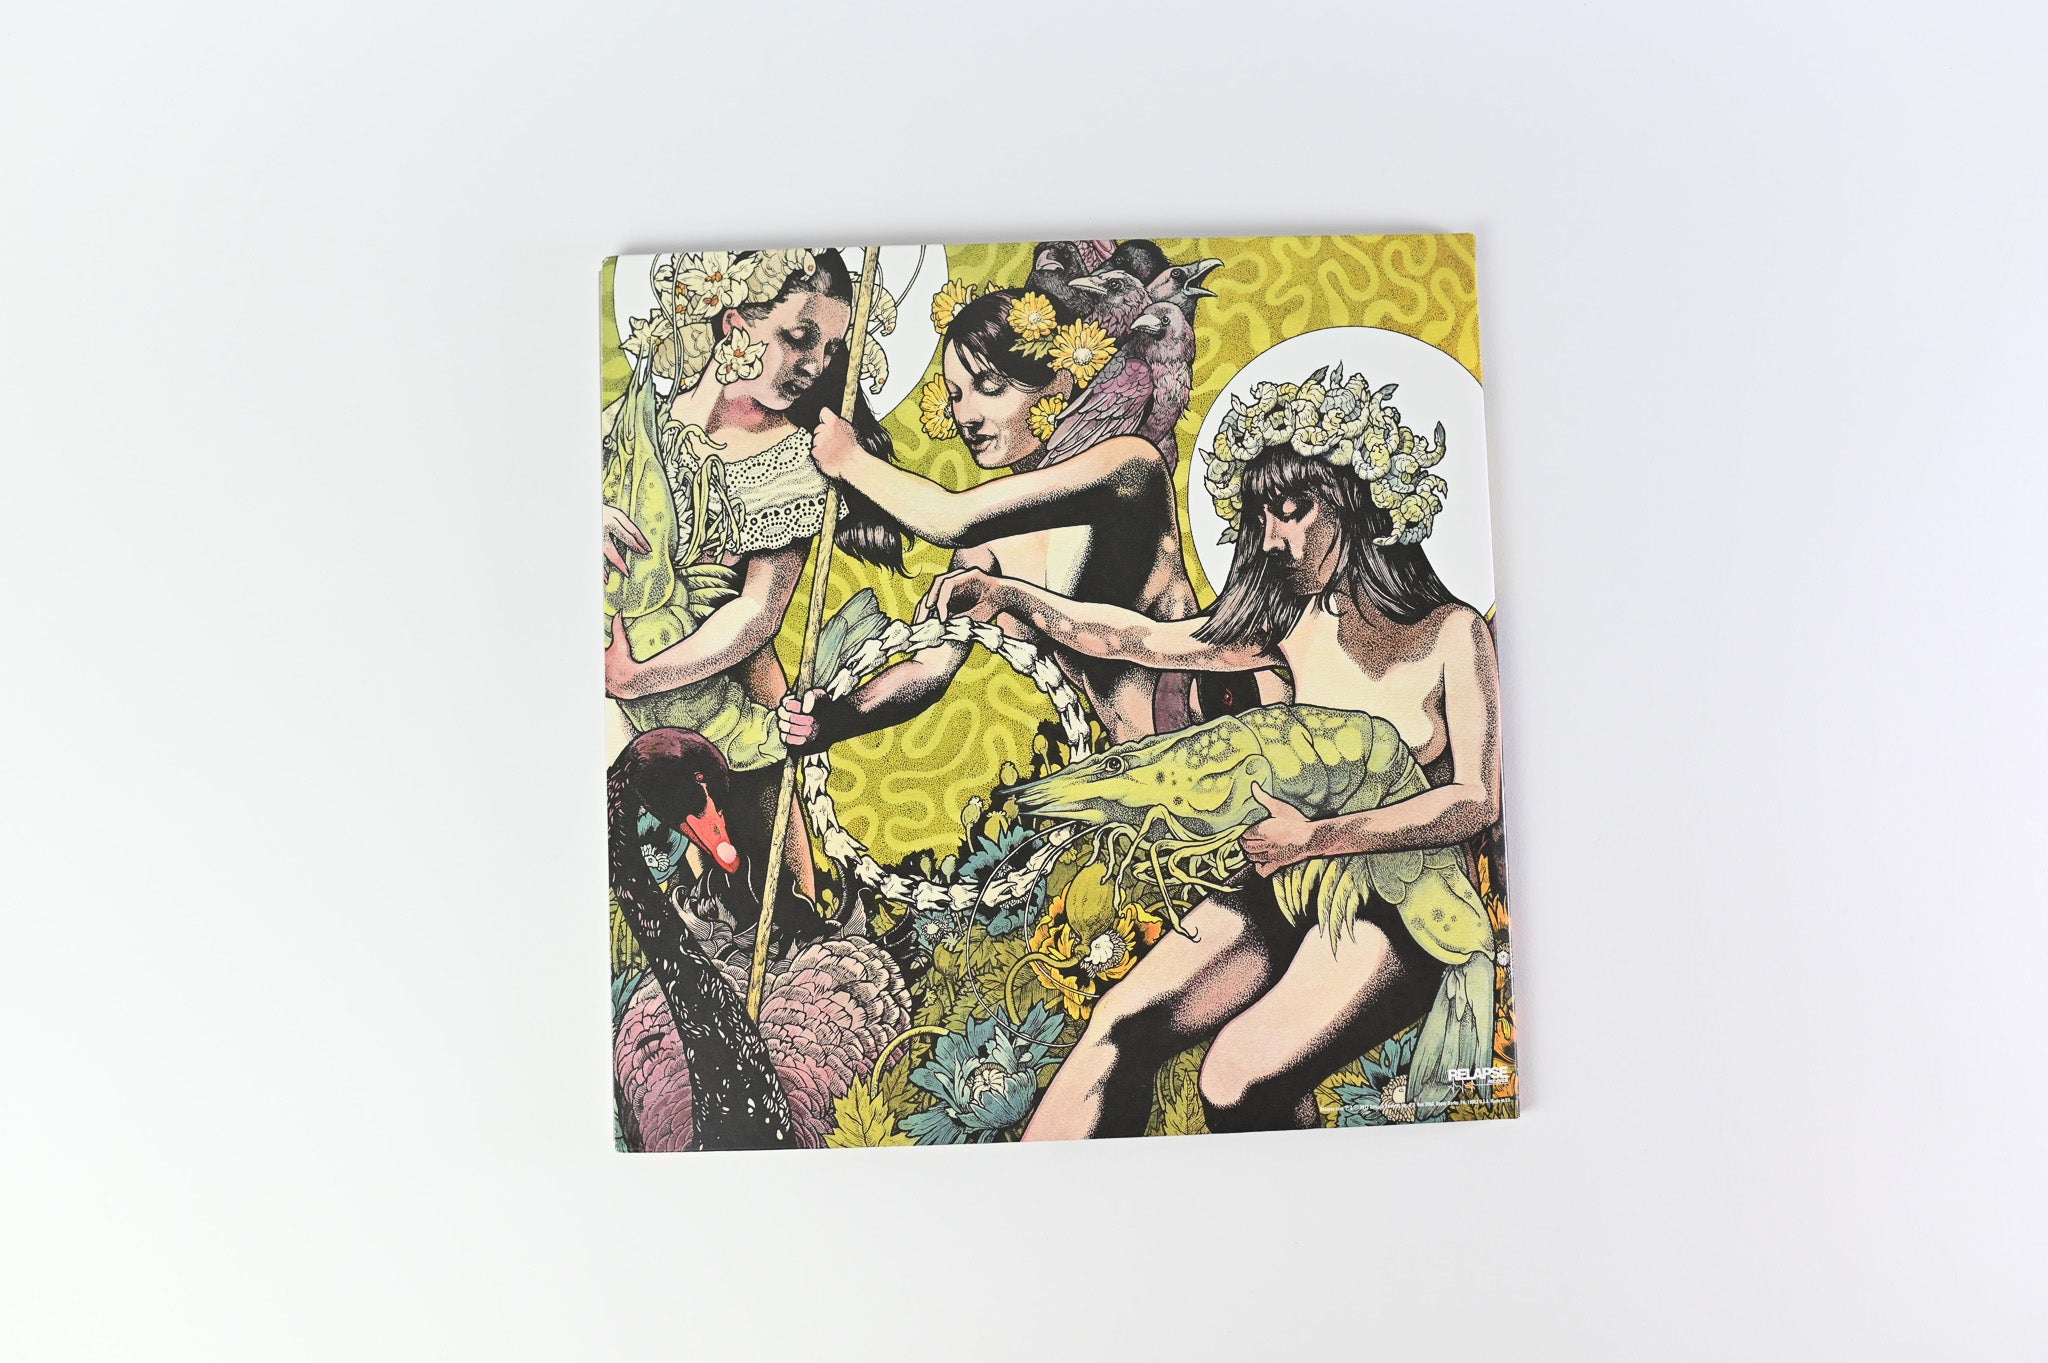 Baroness - Yellow & Green on Relapse Ltd Picture Disc Edition